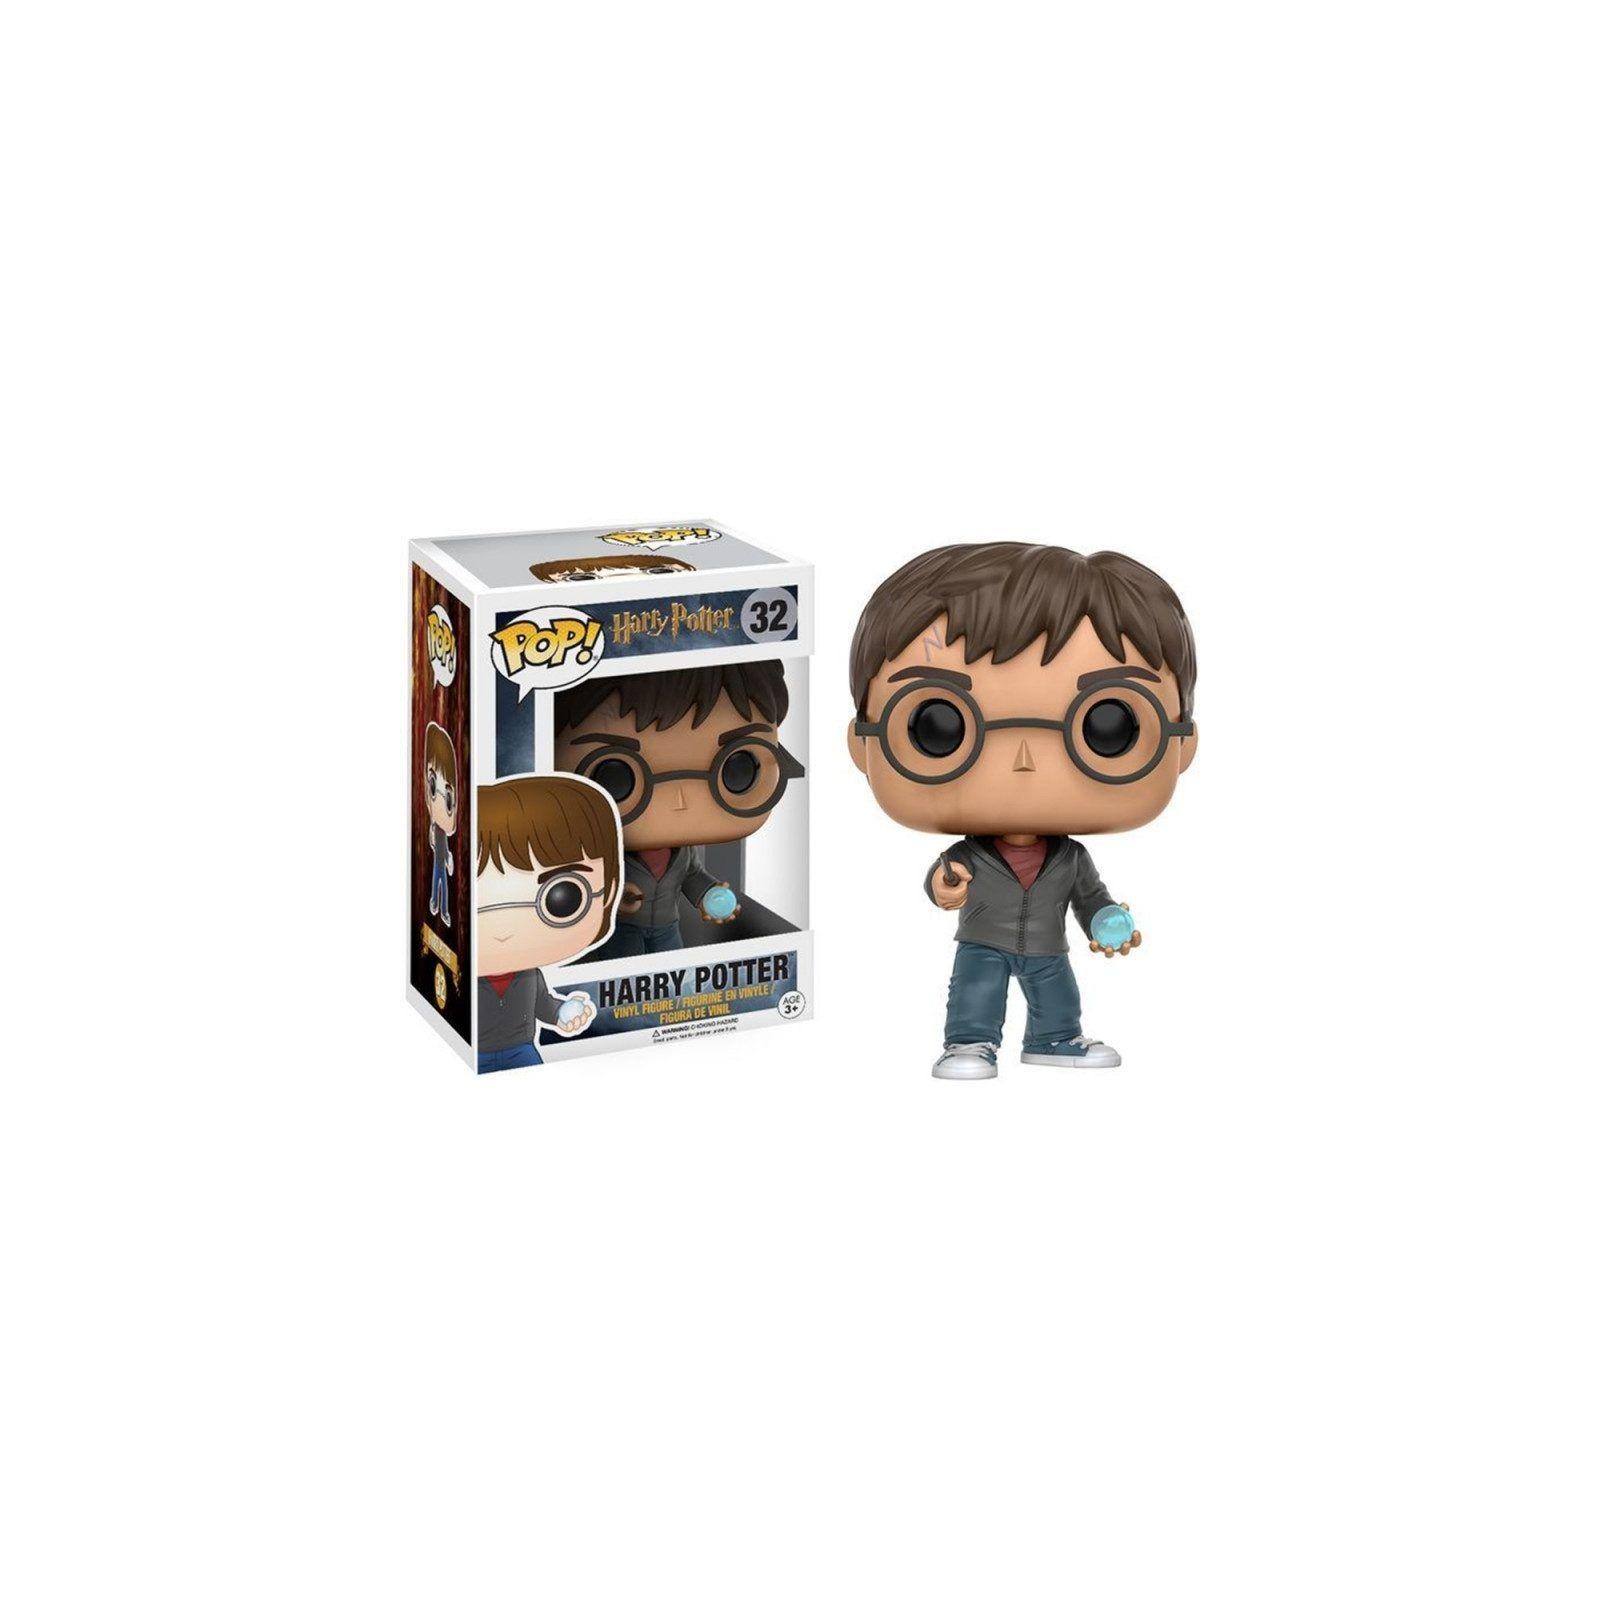 Funko Pop - Harry Potter - Harry Potter with Prophecy - 32 (Damaged Box) FUNKO - 1